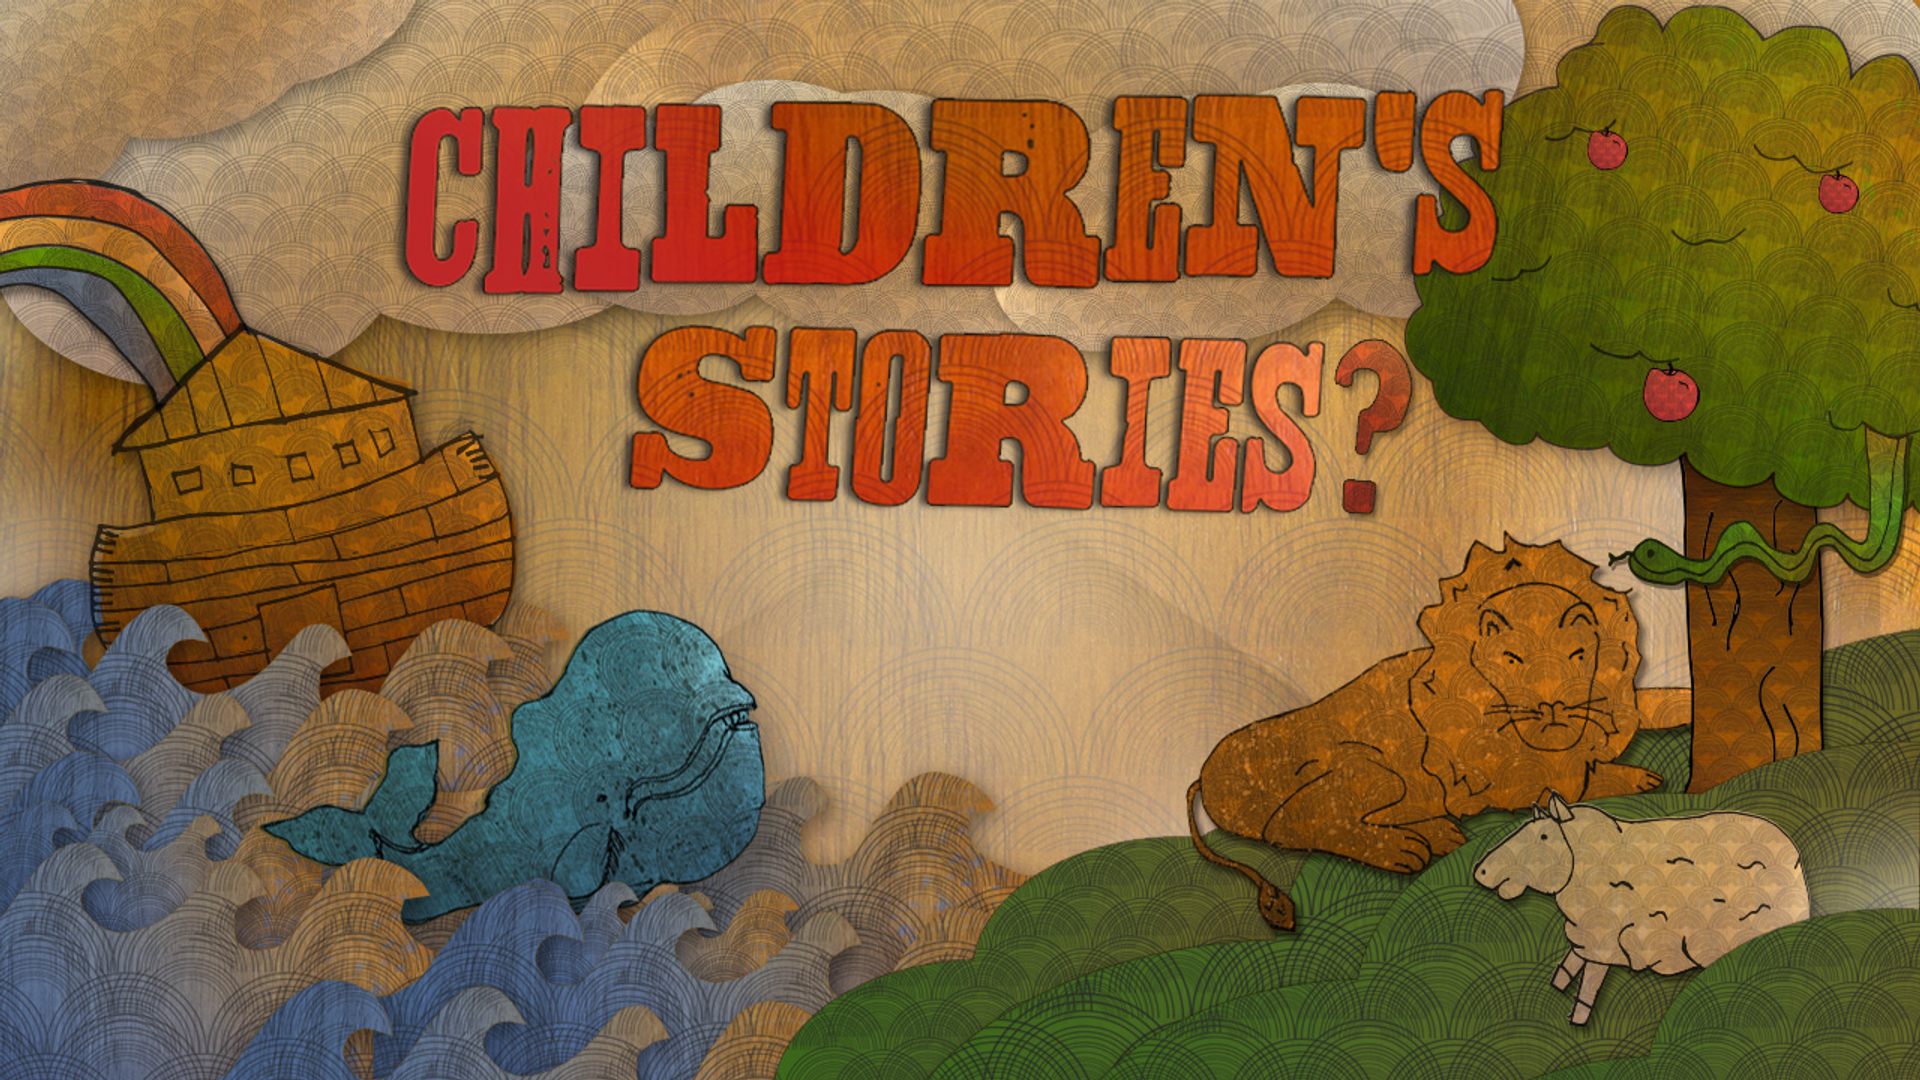 Join Us This Sunday As We Kick Off Our New Series, “Children’s Stories?” Hero Image